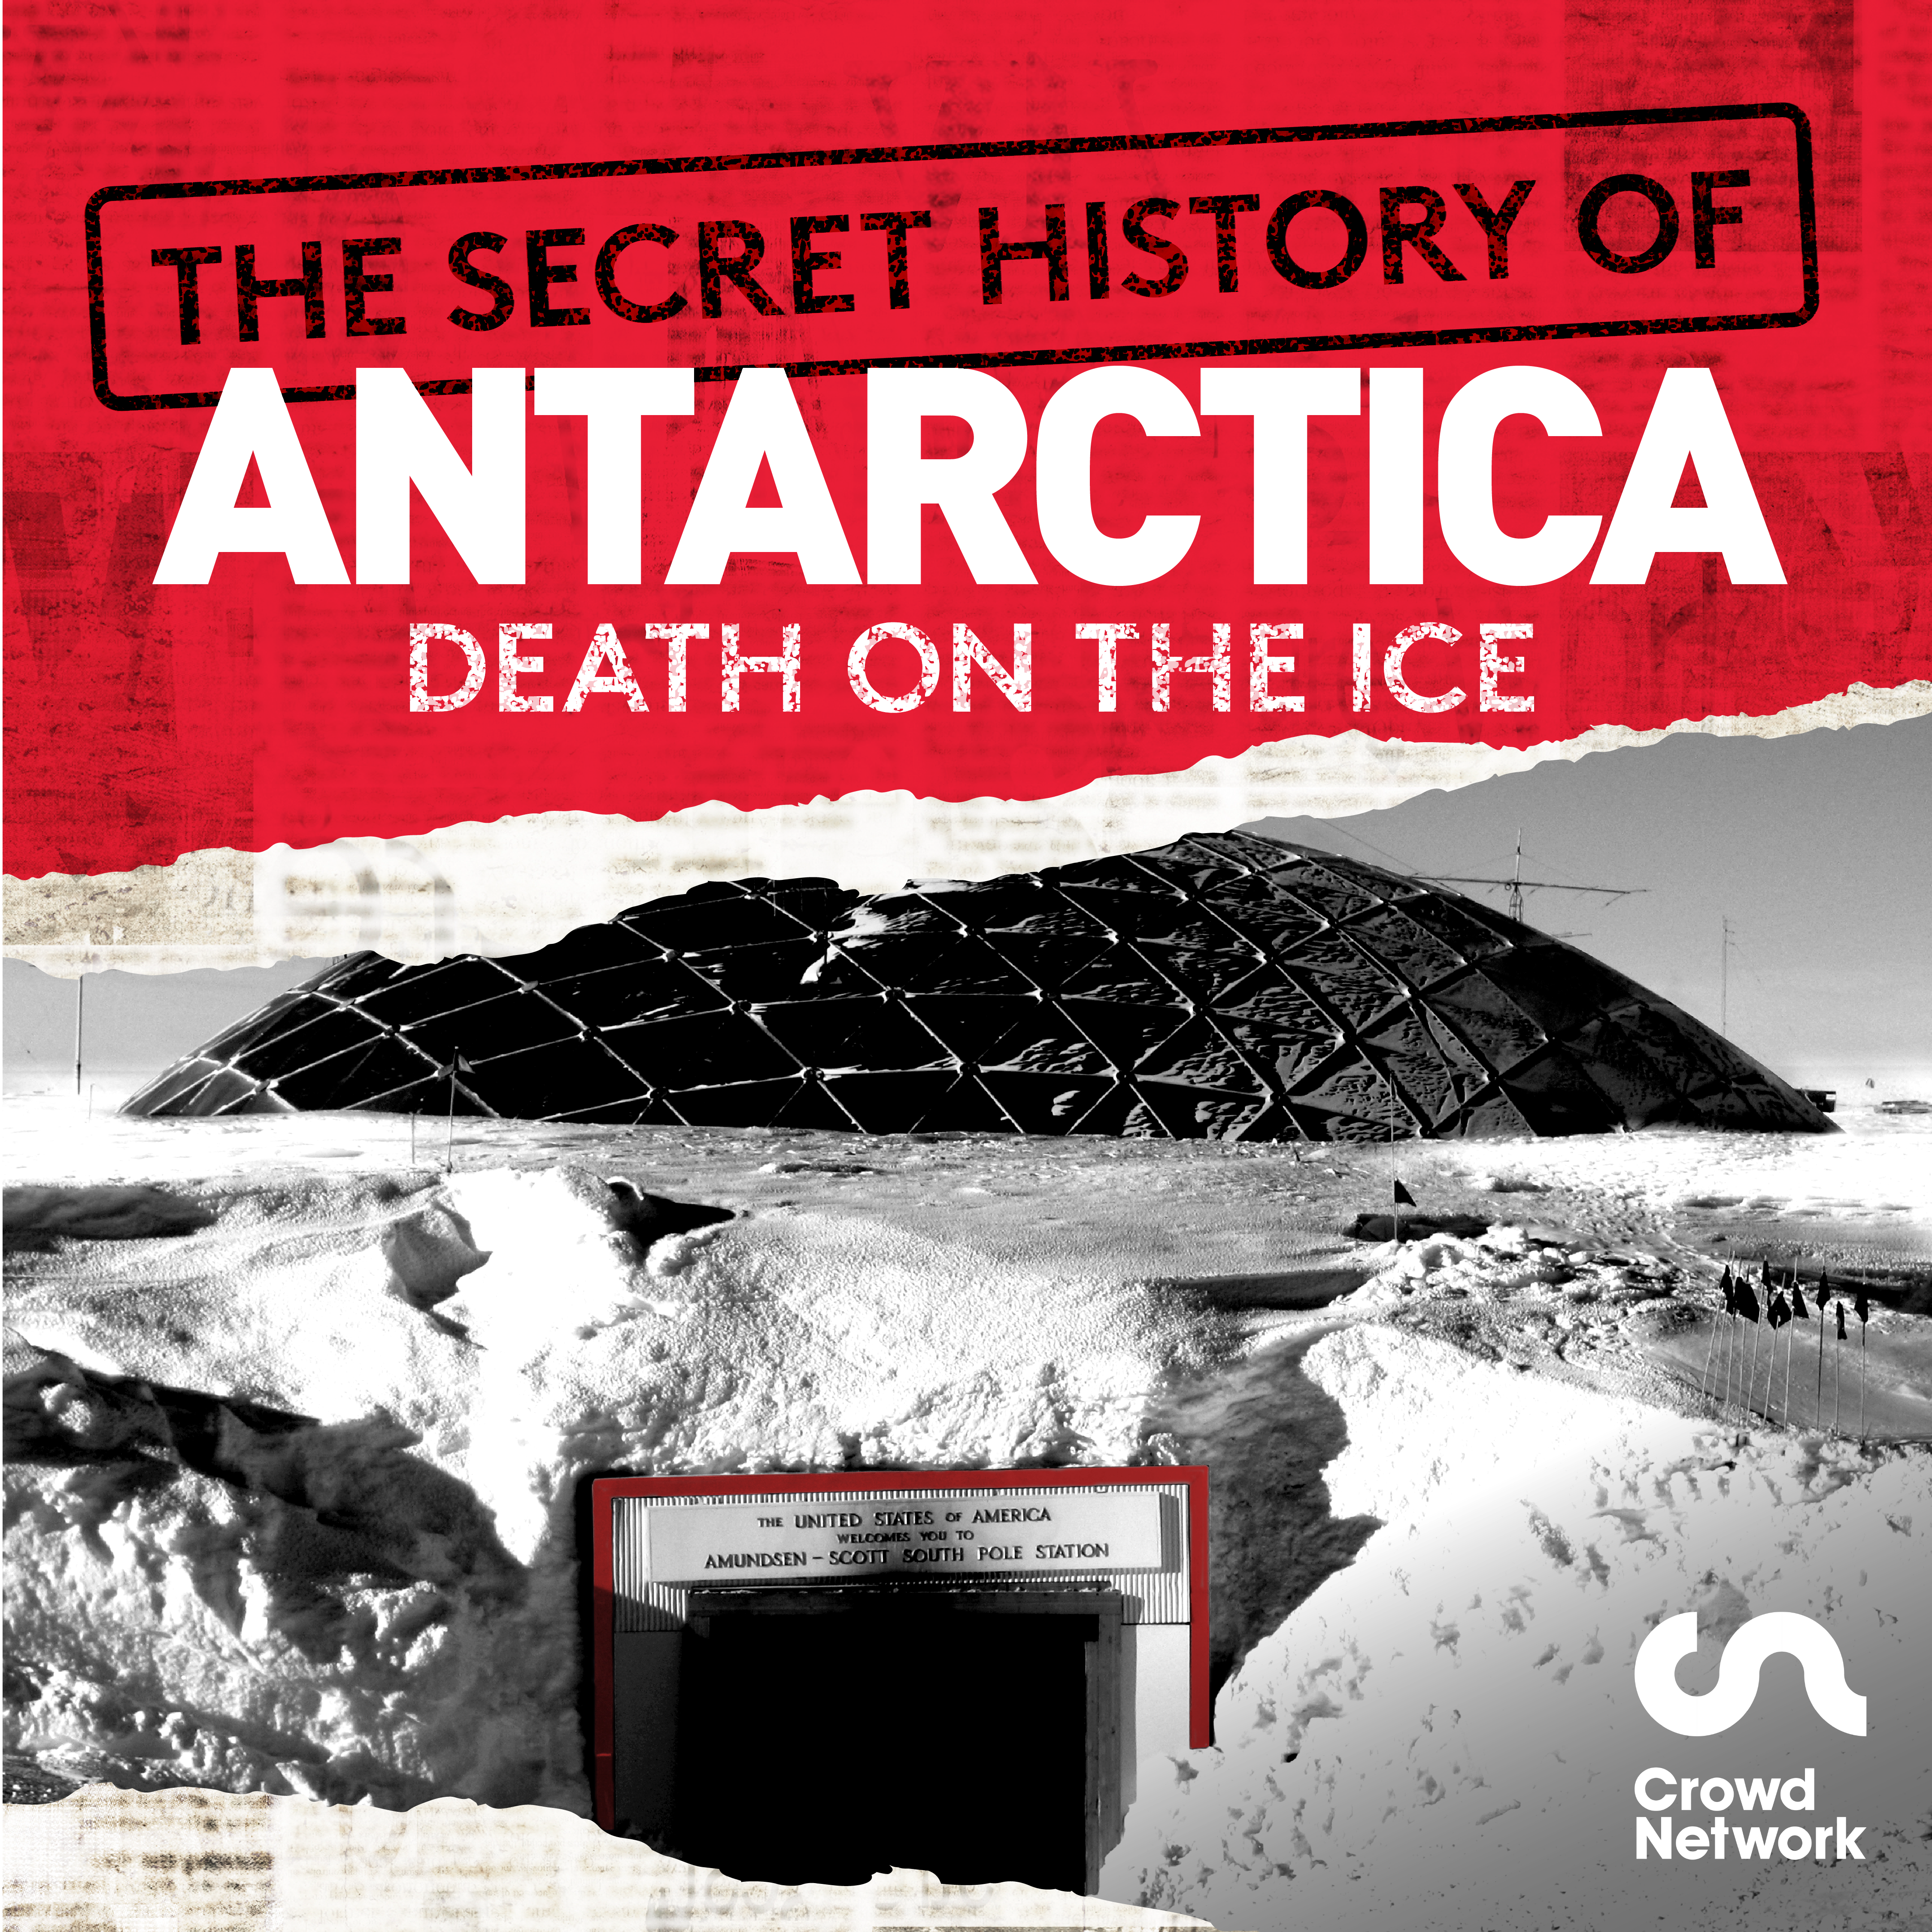 Coming soon…The Secret History of Antarctica: Death on the Ice